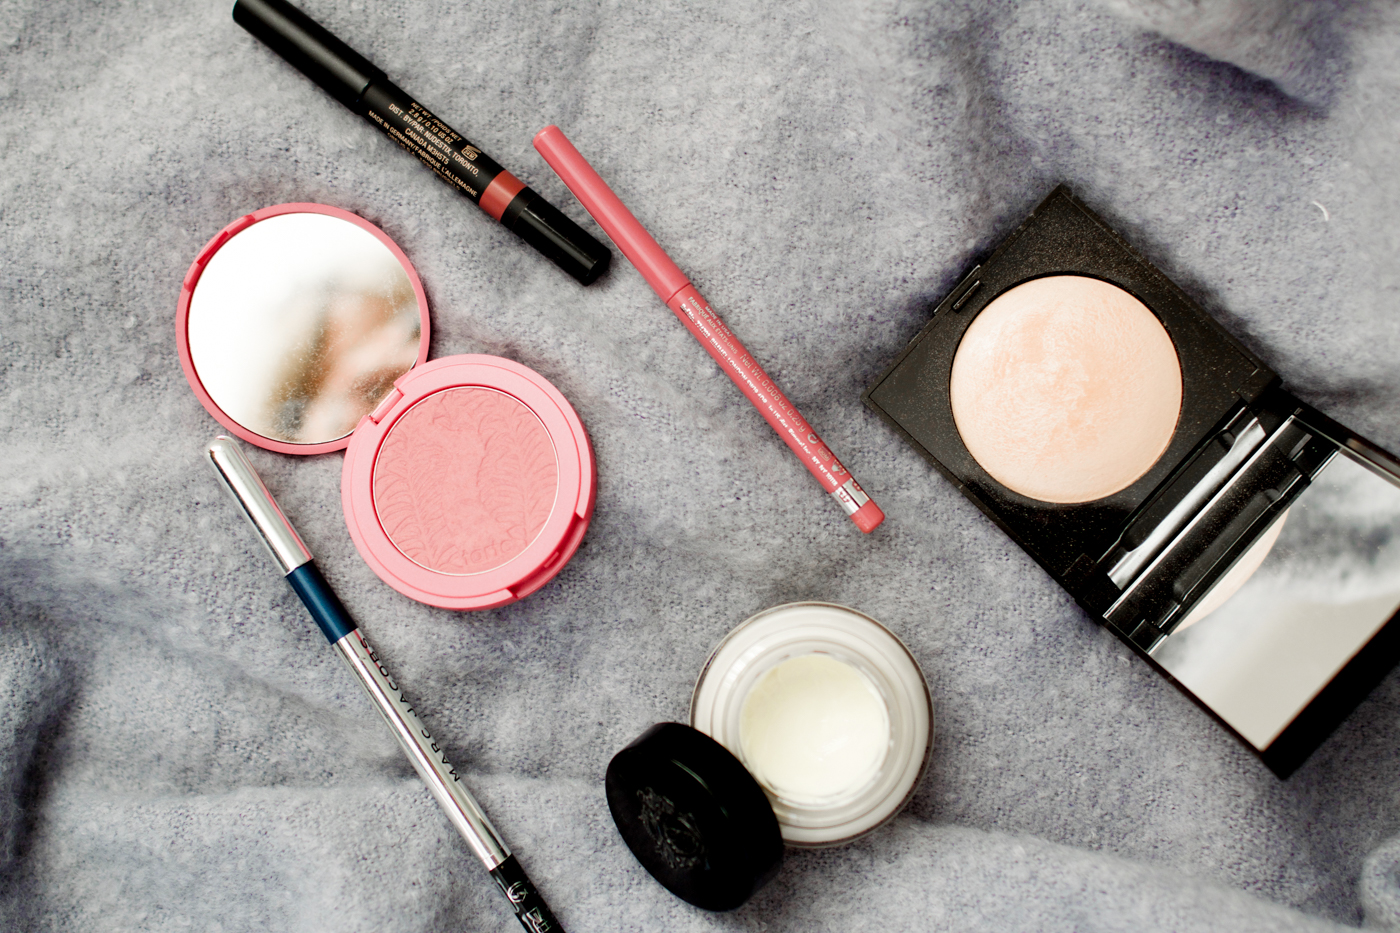 3 Things to do with your Makeup in the Fall